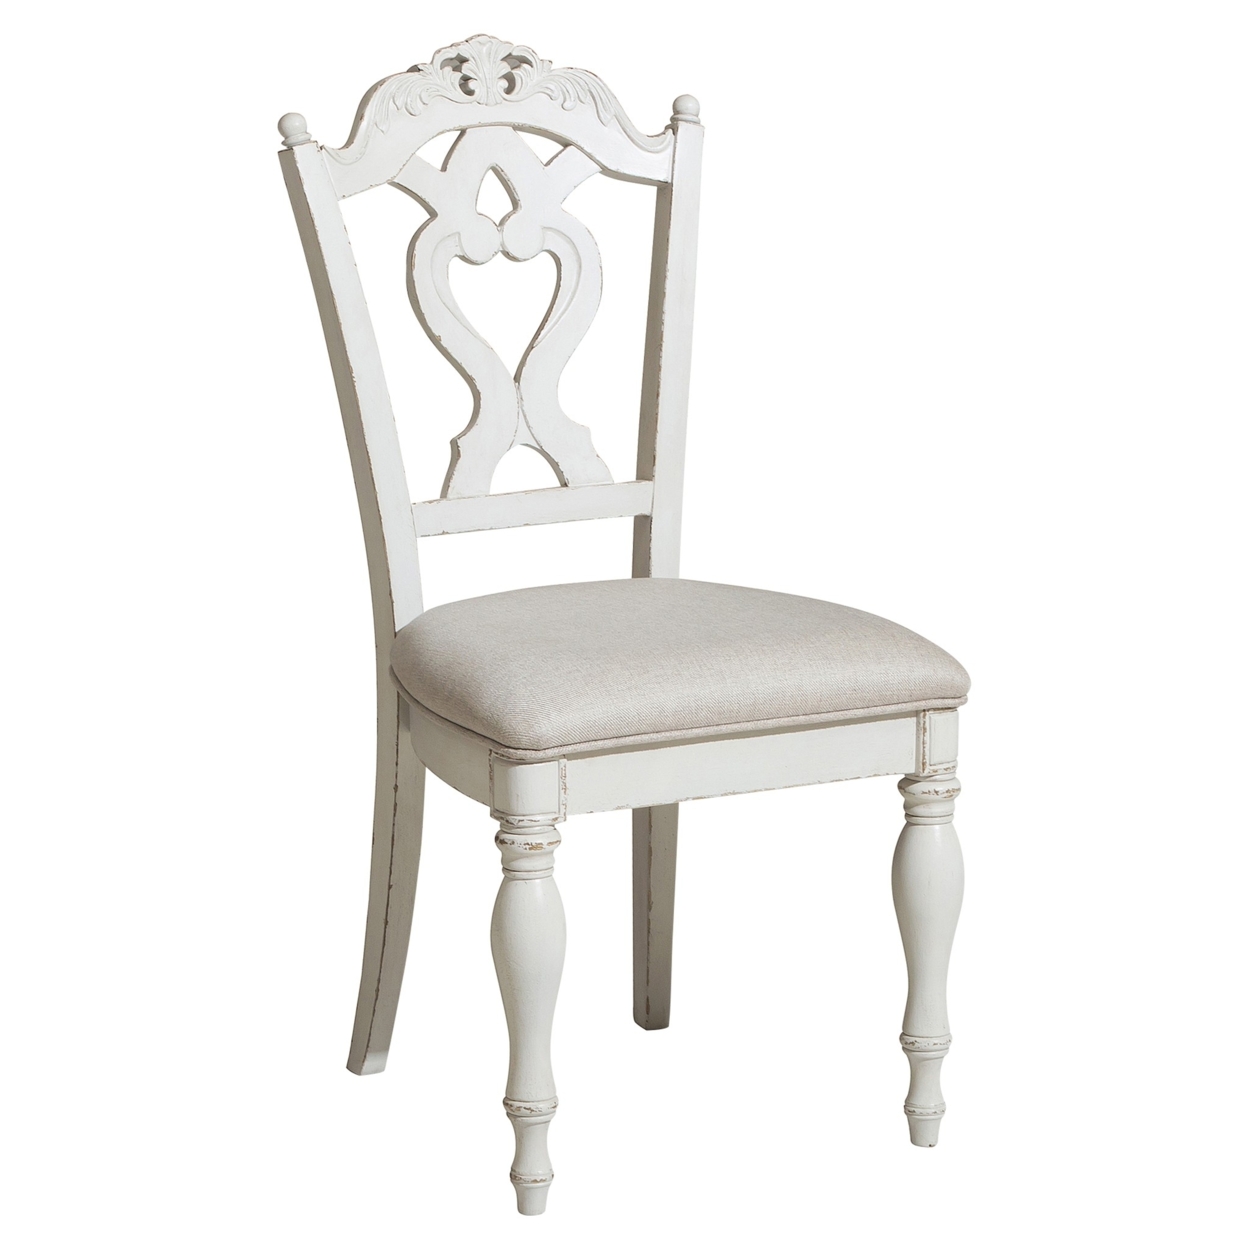 Victorian Style Writing Desk Chair With Engraved Backrest, Antique White- Saltoro Sherpi